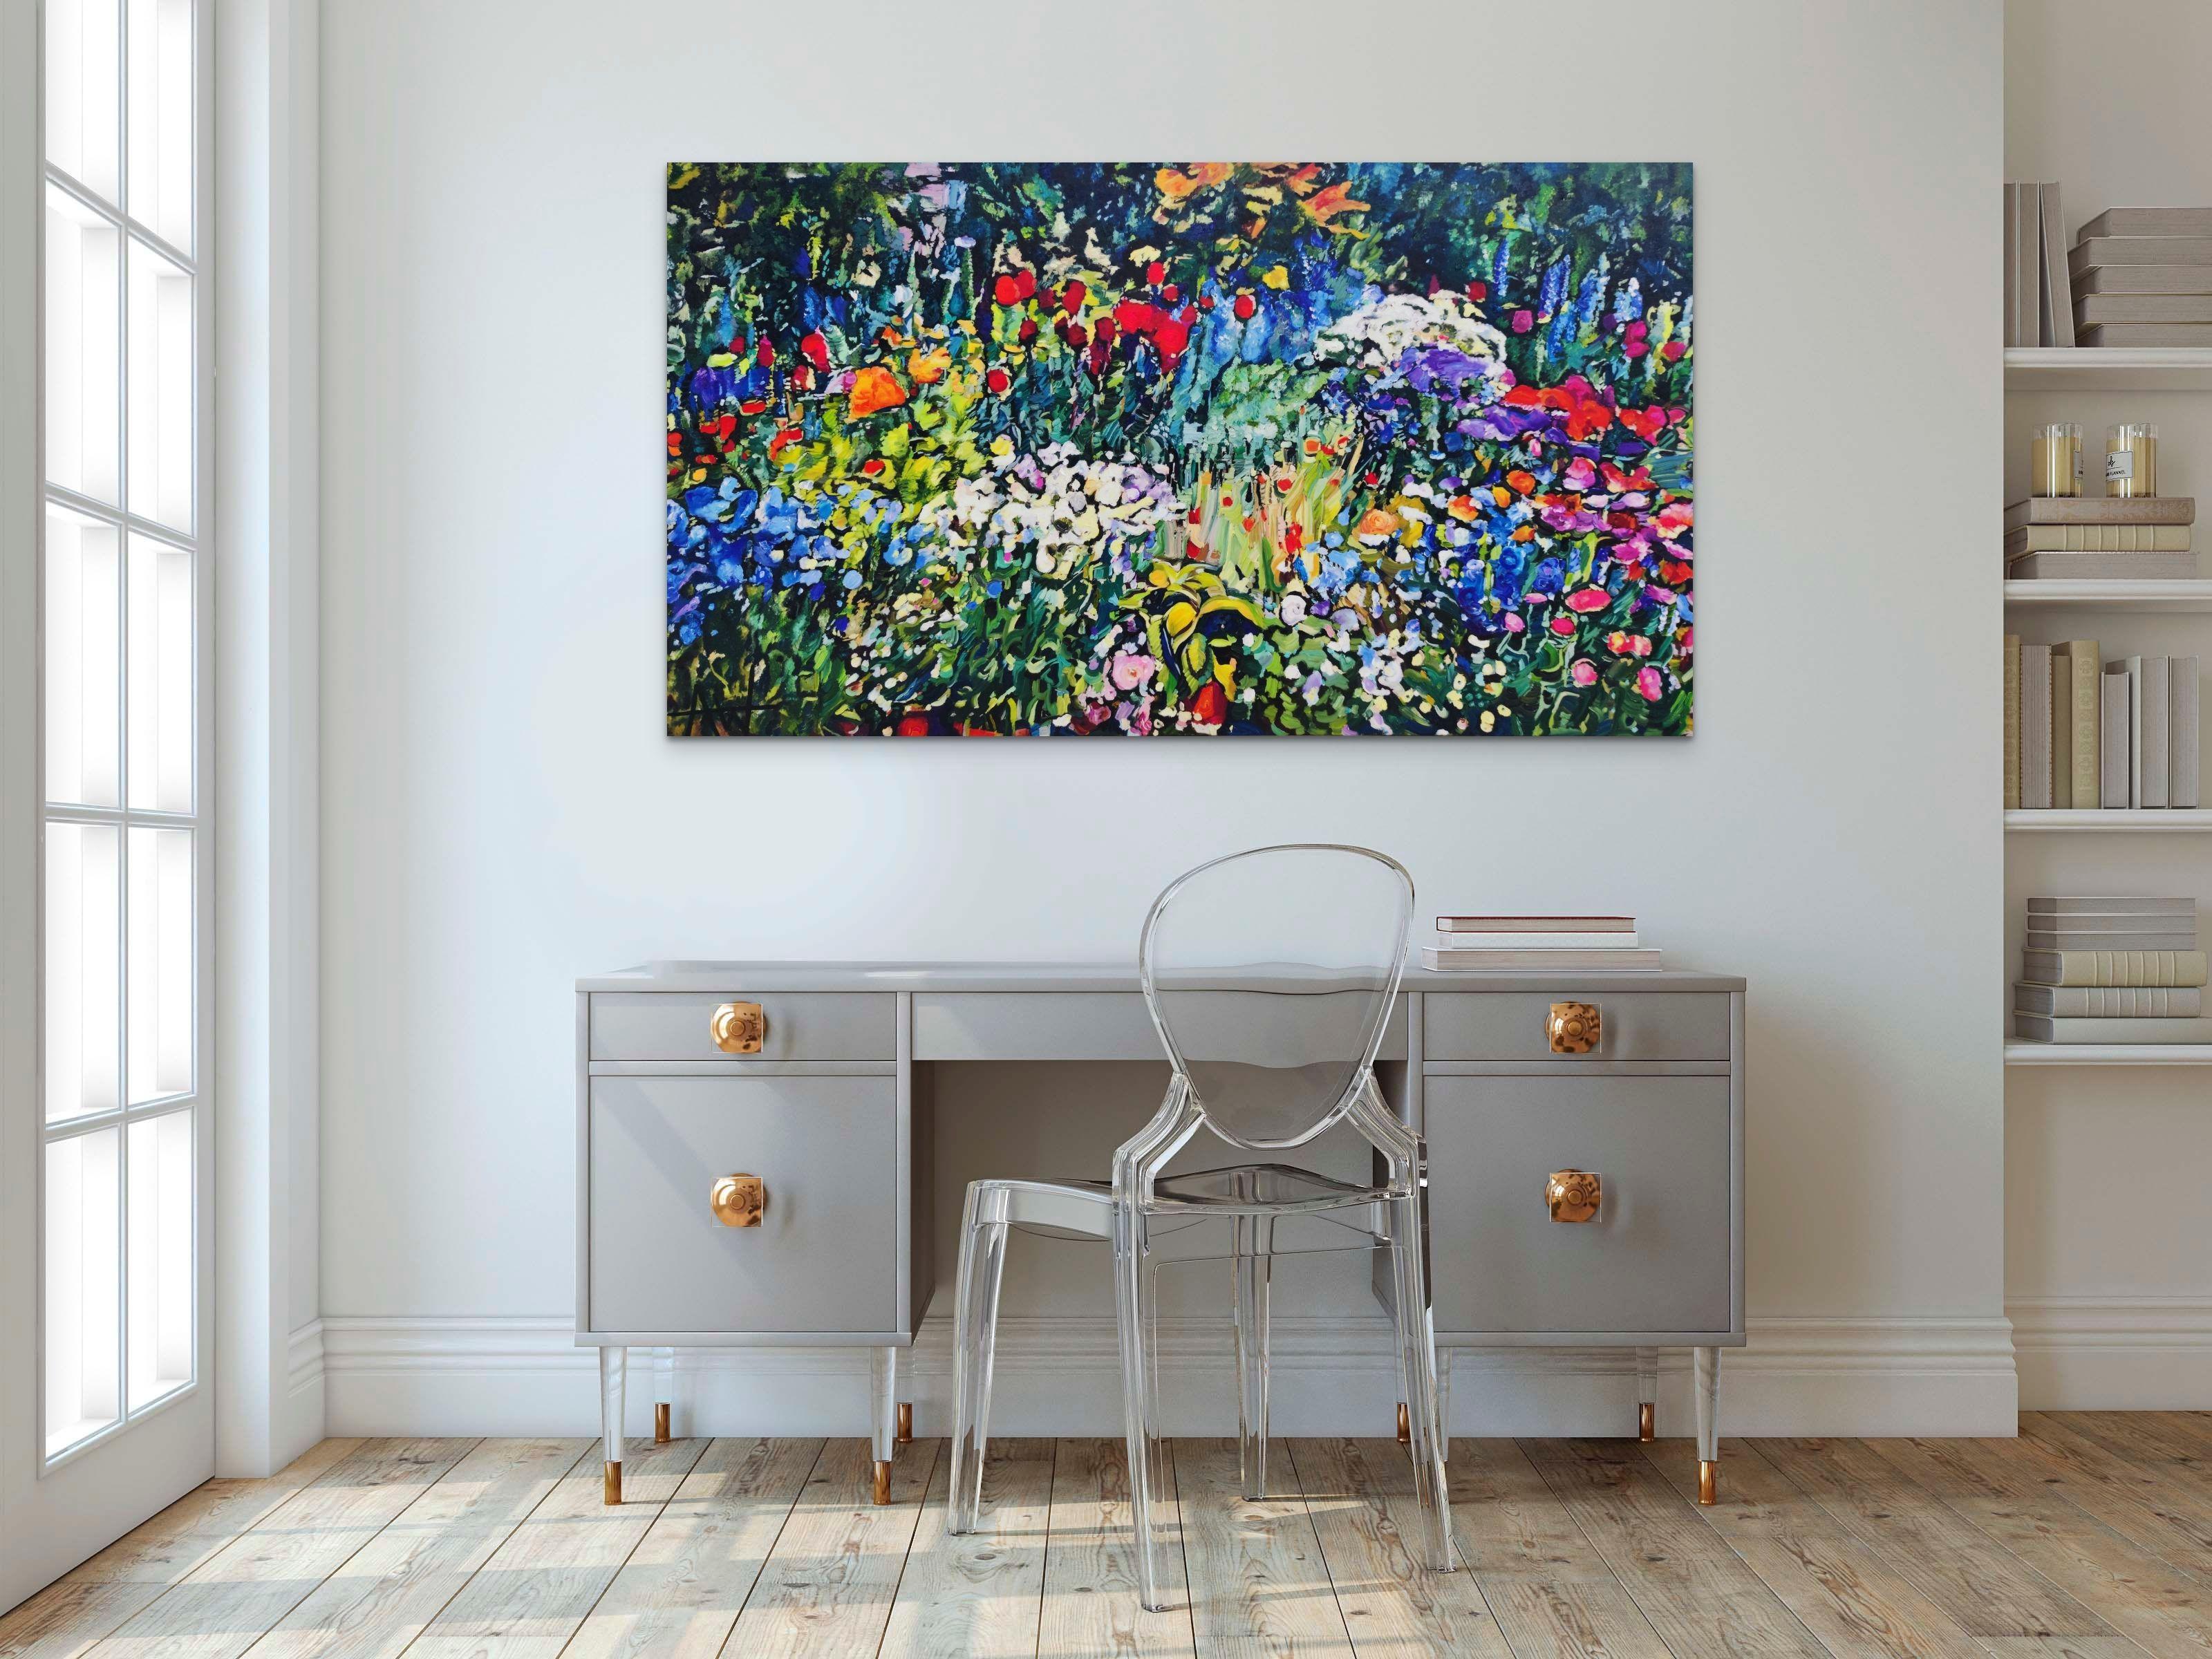 Sanctuary, oil on canvas, 160 x 90 x 3 cm Sanctuary, I breathe deeply and smell the sweet perfume of the flowers. The garden sways on a gentle breeze. I am lulled by the murmur of nature. This is my Sanctuary. Sanctuary suggests the colour and